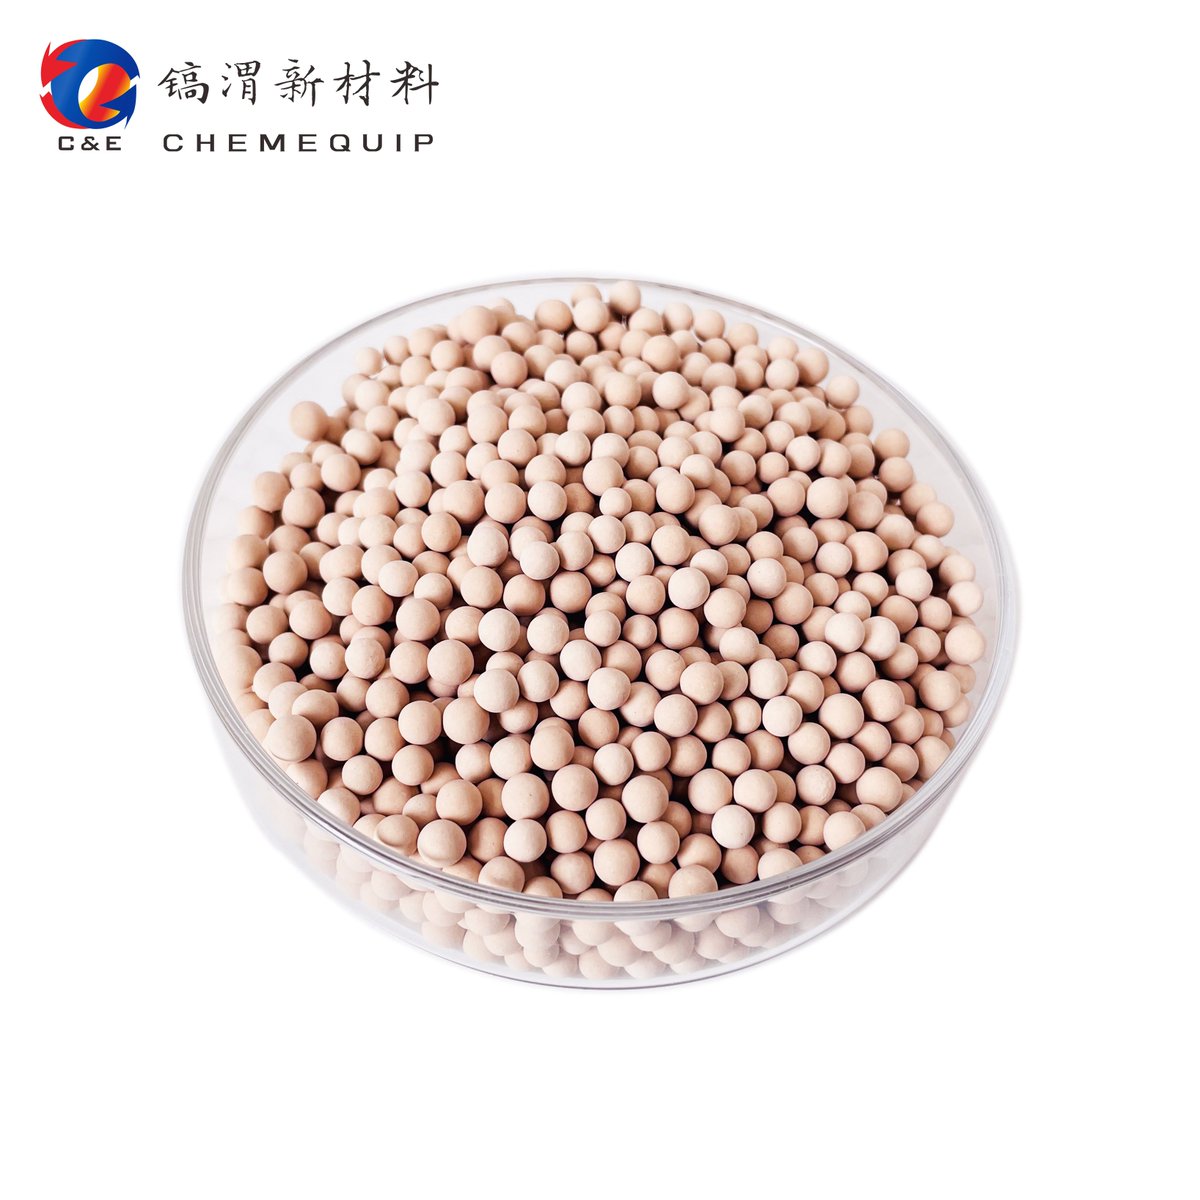 Molecular sieve can meet the extensive needs of the industry for adsorption and selection of characteristic products, and it is also widely used in industrial separation.#desiccant #molecularsieve #adsorbent  #environmentalprotection #gas #drying #purification #airseparation #VSA